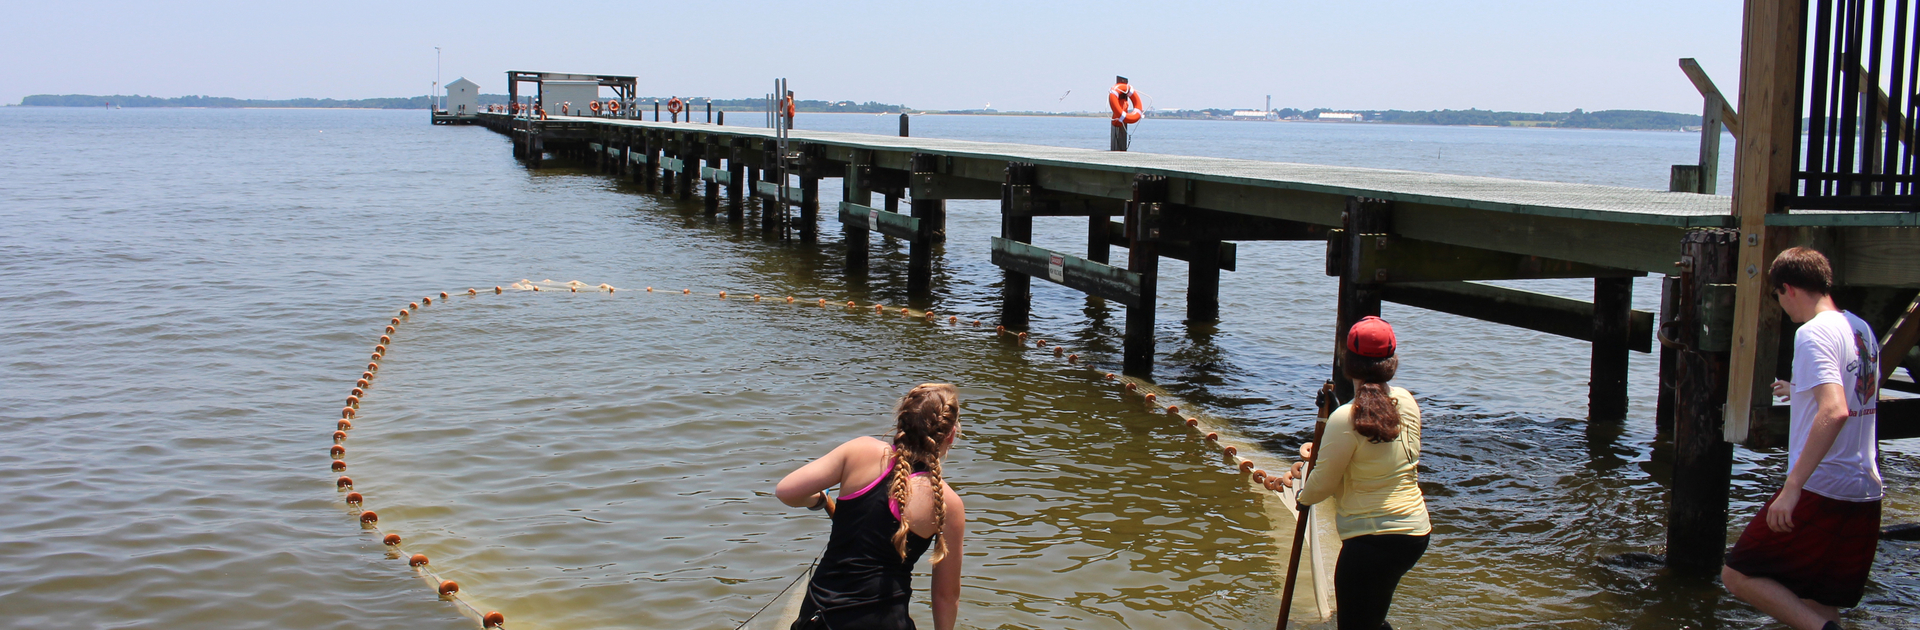 Students collect specimen with a large net off of CBL's research pier